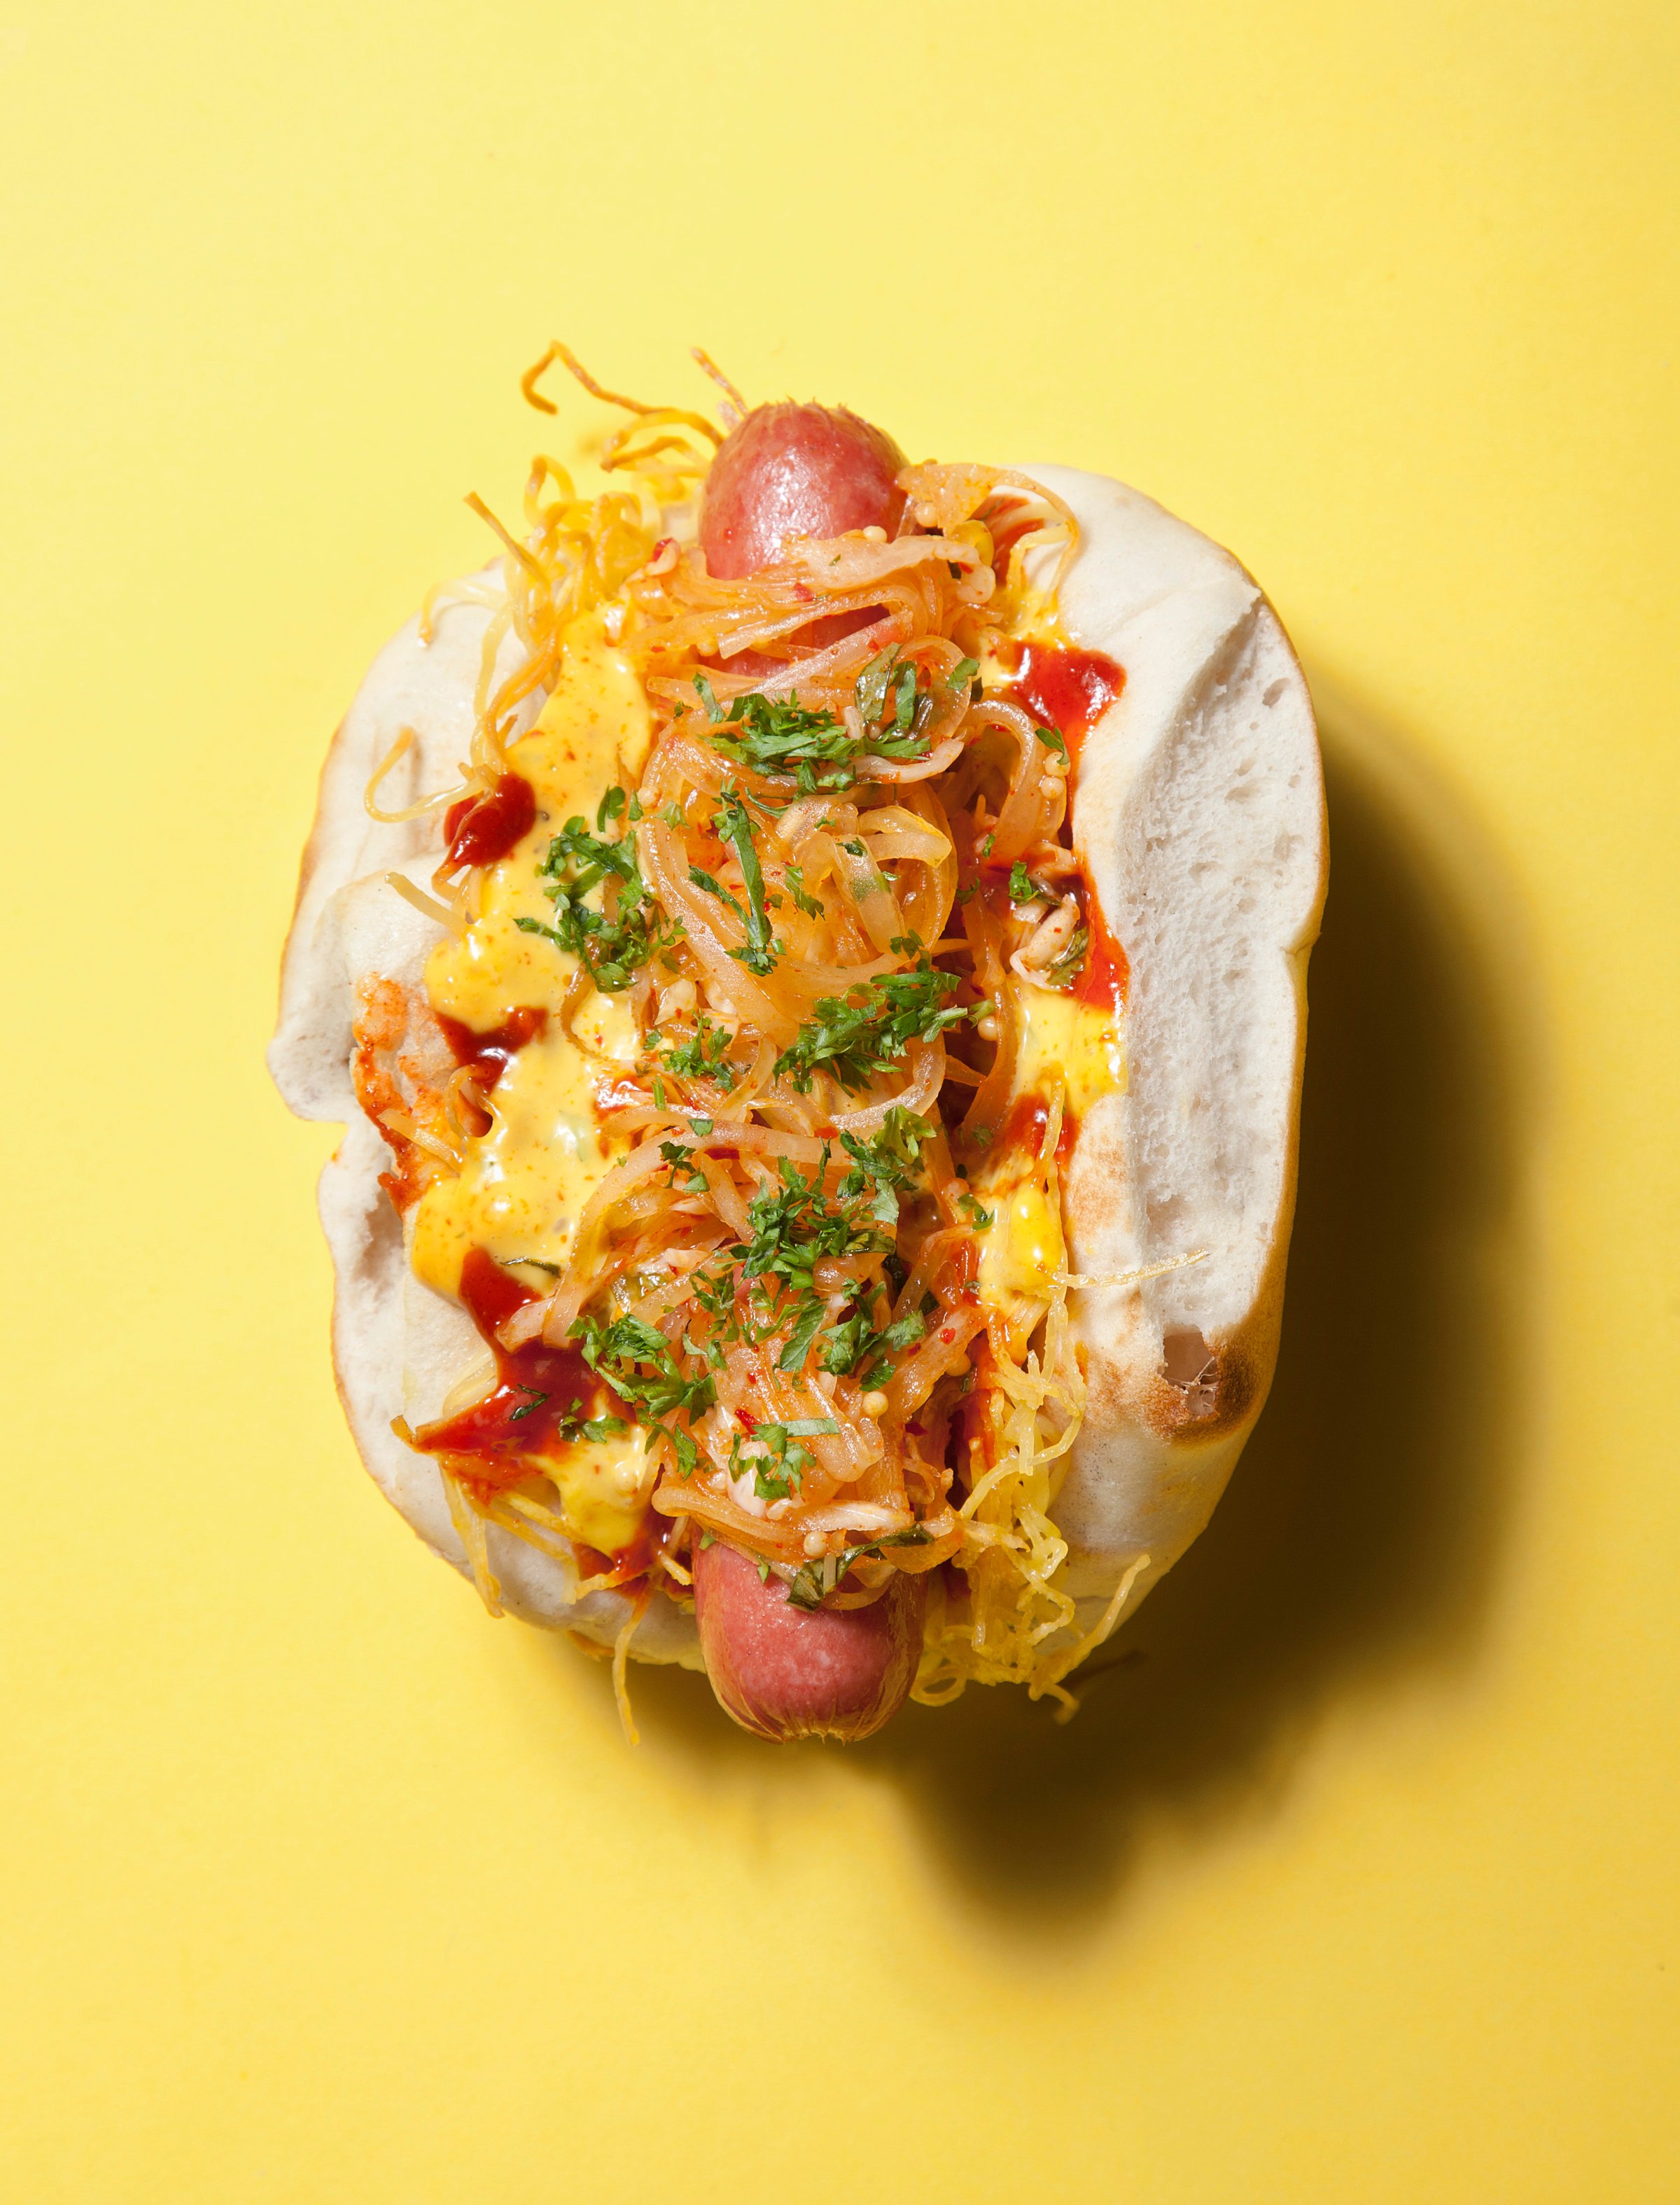 A Belly Dog at Belly Shack in Chicago. Description: An all-beef hot dog, topped with egg noodles and pickled green papaya, with togarashi spiced fries. Photo by Kevin J. Miyazaki/Redux